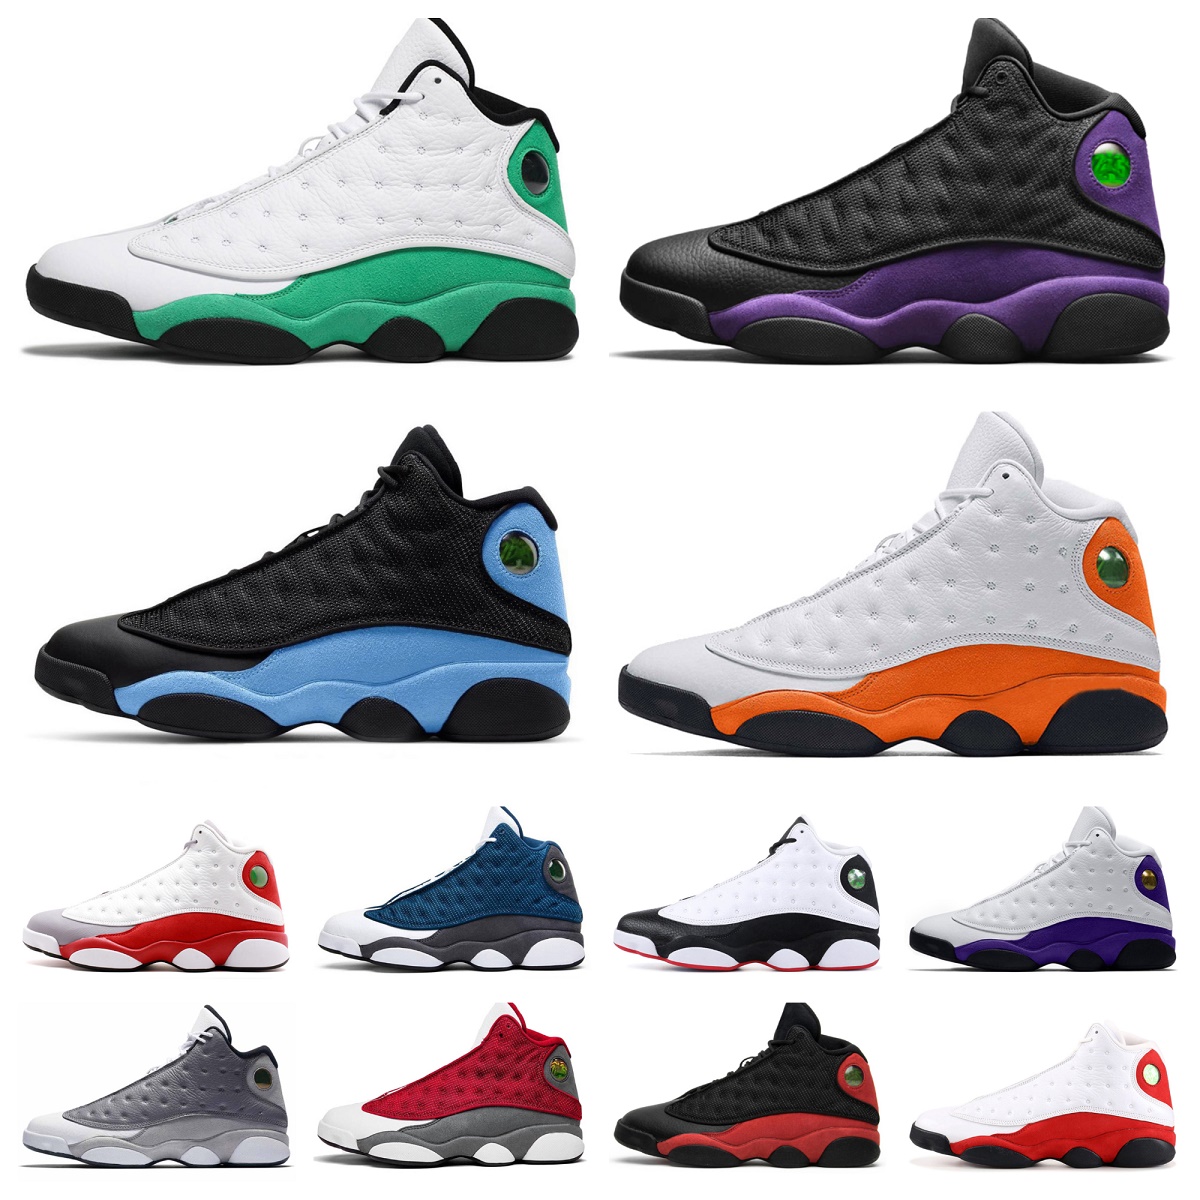 

Jumpman 13 13S Basketball Shoes Mens High Brave Blue Flint Bred Island Green Red Dirty Hyper Royal Starfish He Got Game Black Cat Court Purple Grey Toe Chicago Sneakers, Bubble package bag